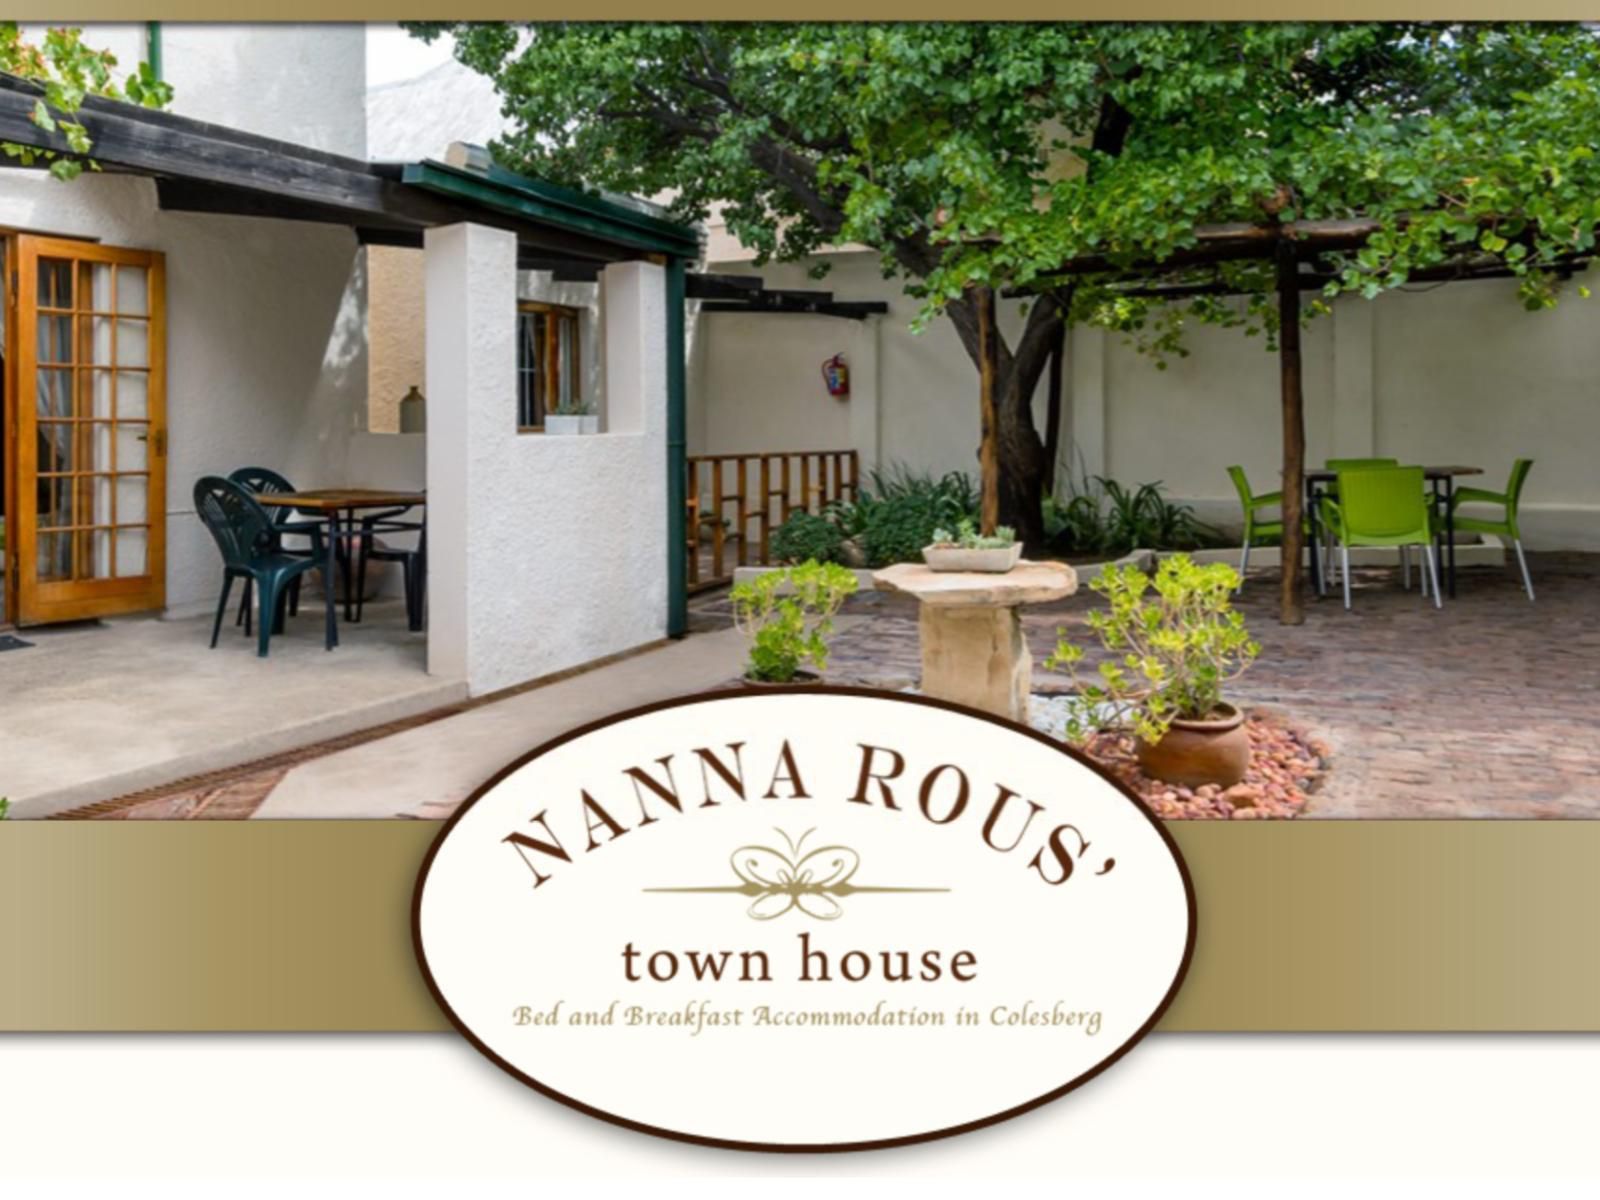 Nanna Rous Town House Colesberg Northern Cape South Africa House, Building, Architecture